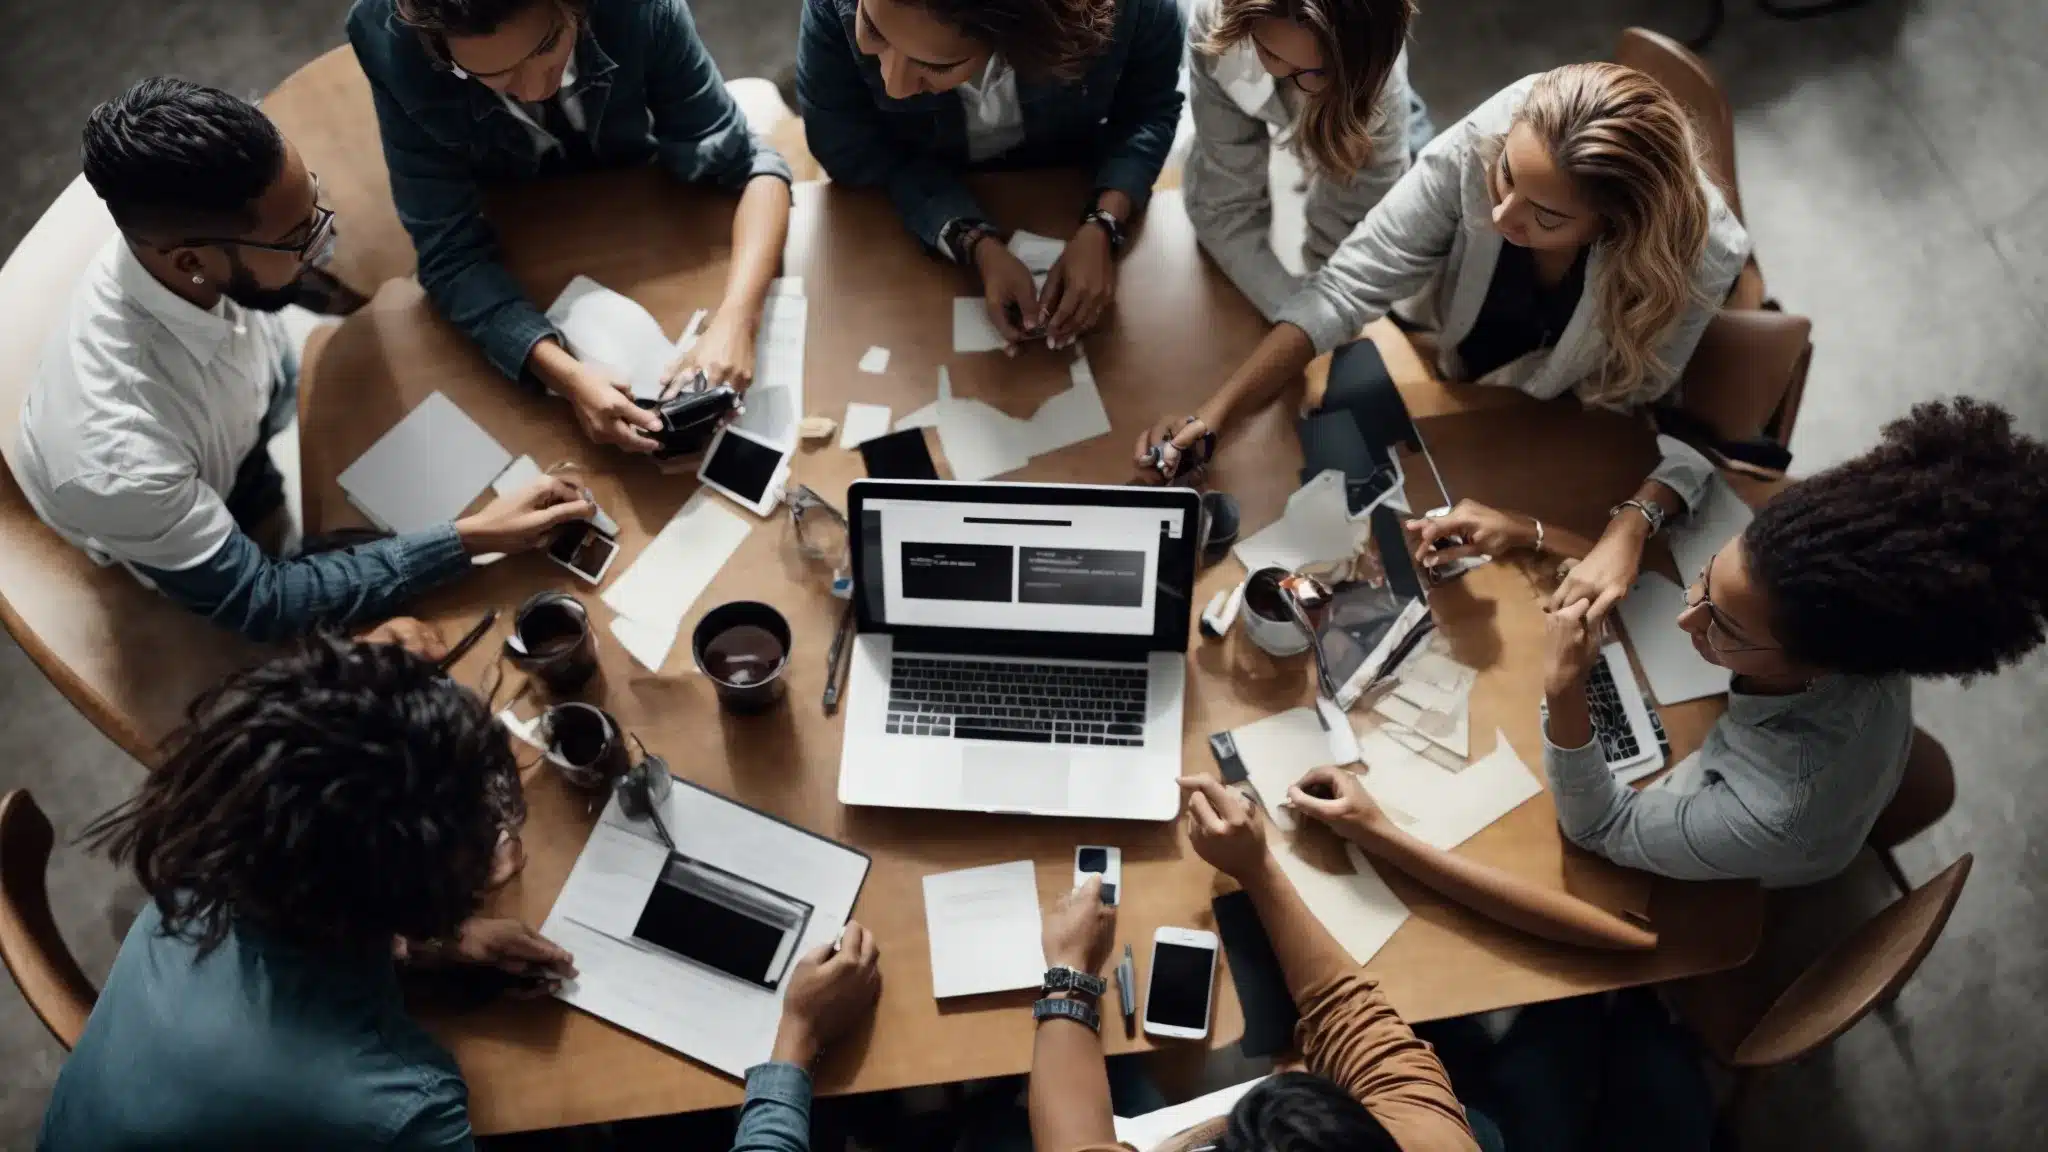 A Diverse Team Of Creative Professionals Collaborating Around A Large Table, Brainstorming Over Marketing Strategies With Digital Devices And Branding Materials Scattered About.